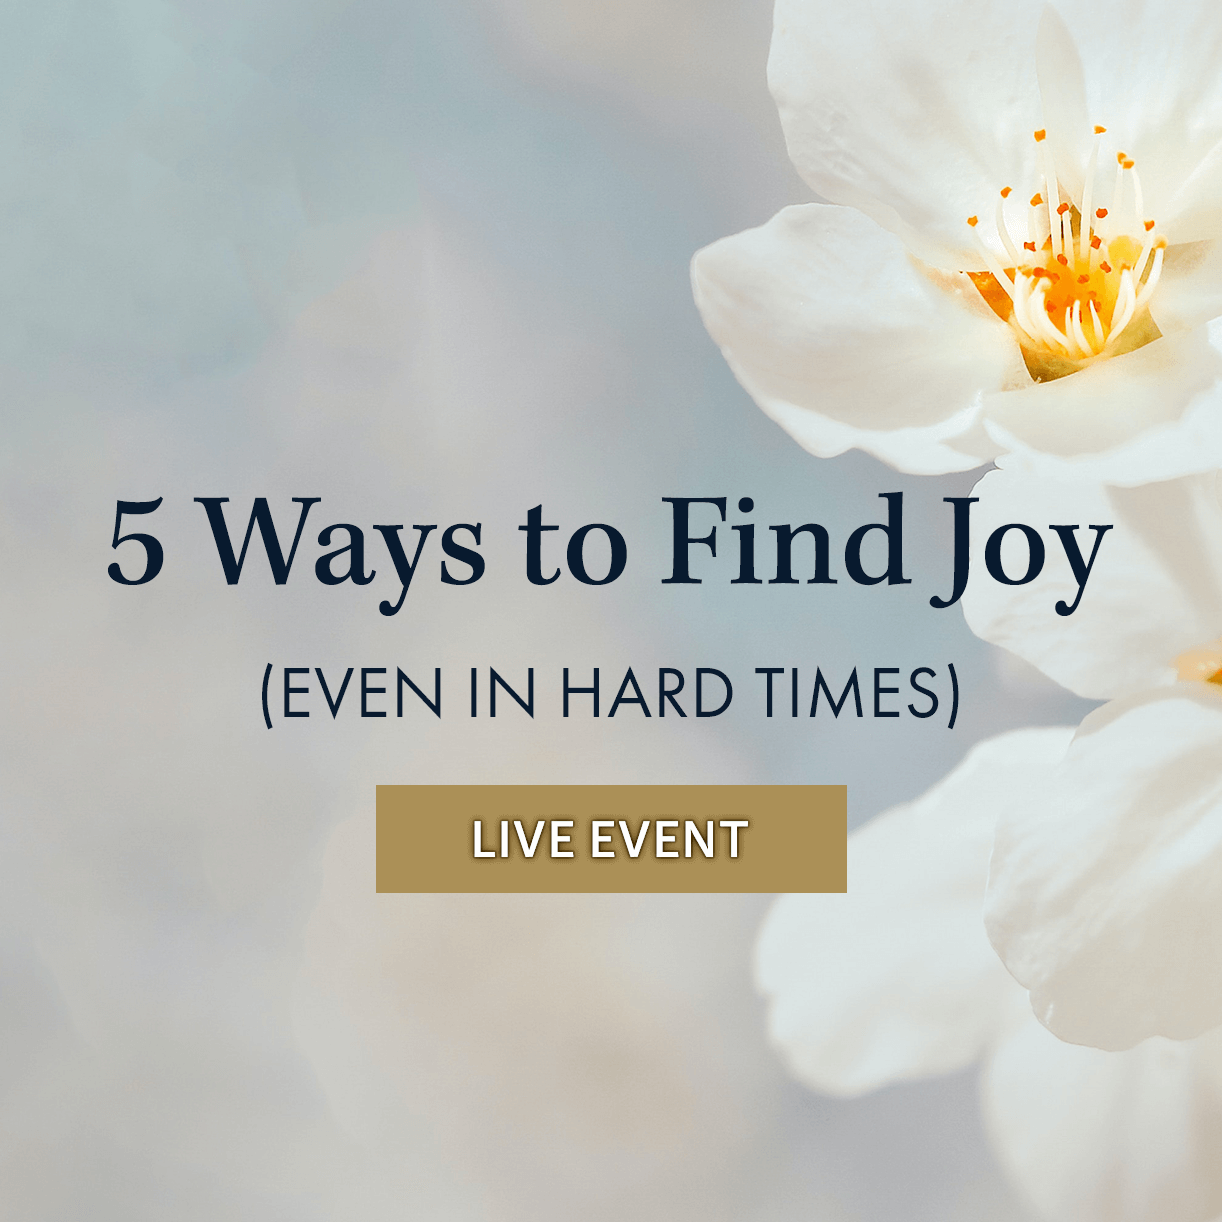 5 Ways to Find Joy (Even in Hard Times)